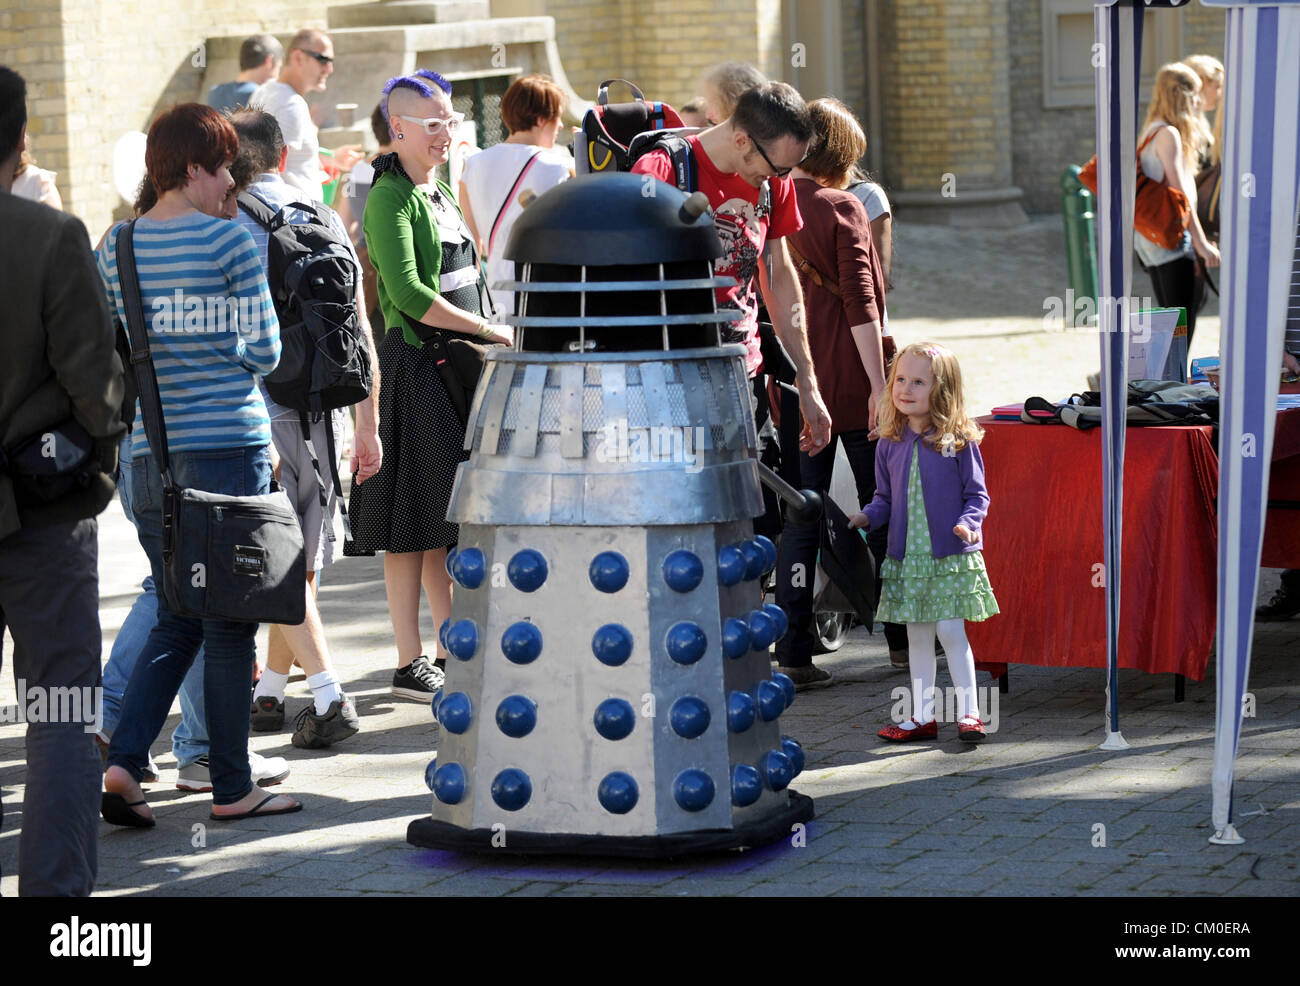 Brighton UK 8th September 2012 - A young spectator is transfixed as a dalek mingles with the crowds at the Brighton Mini Maker Faire at The Corn Exchange and The Dome today . The fair has a mixture of gadgets and technology on display. Credit:  Simon Dack / Alamy Live News Stock Photo